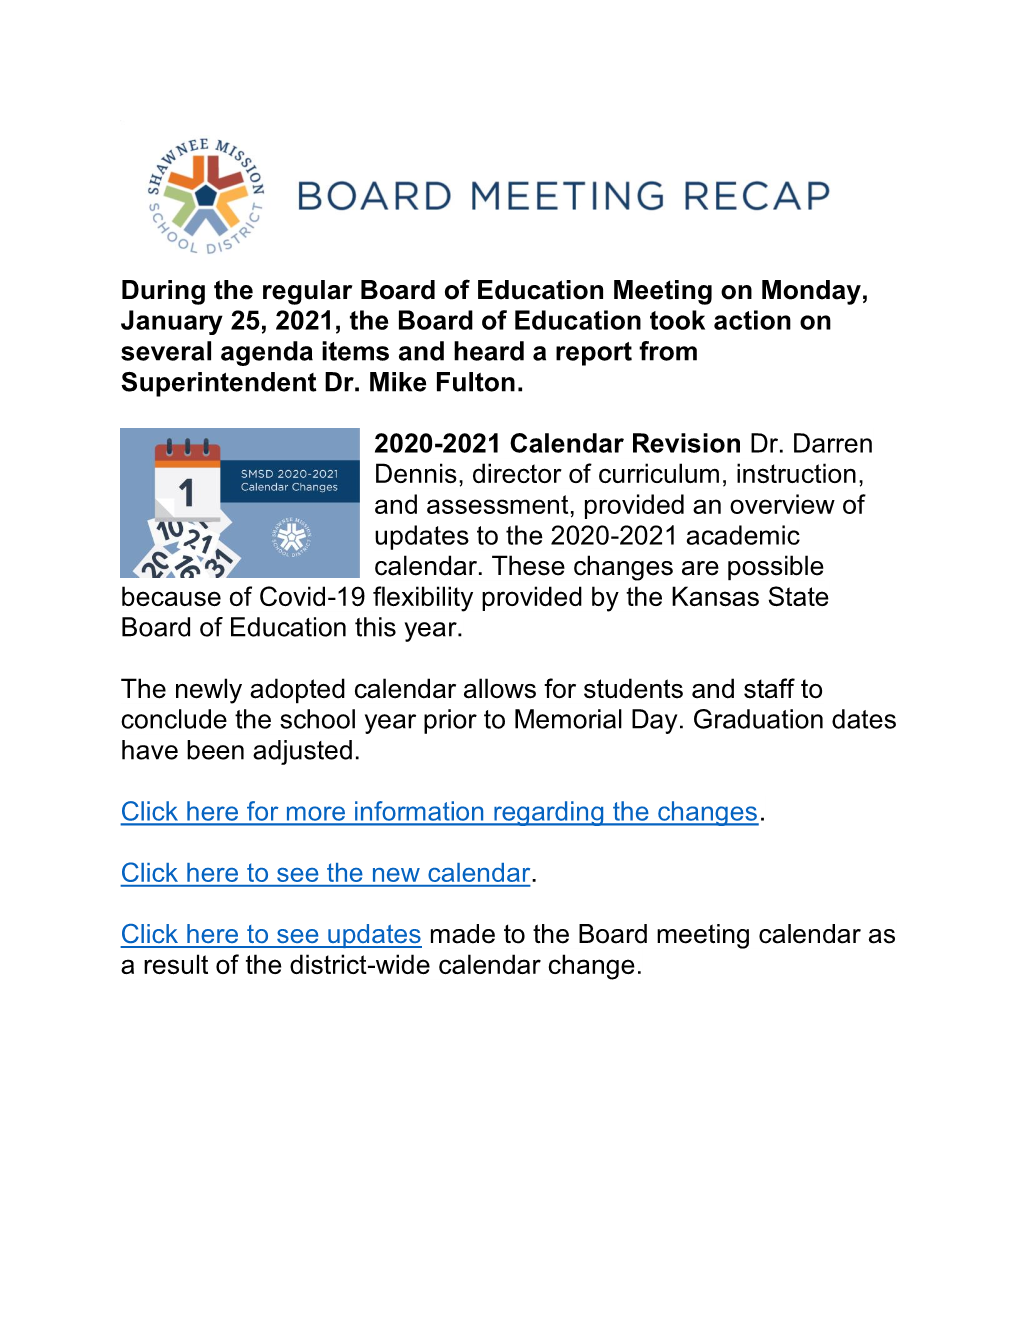 January 25, 2021, the Board of Education Took Action on Several Agenda Items and Heard a Report from Superintendent Dr